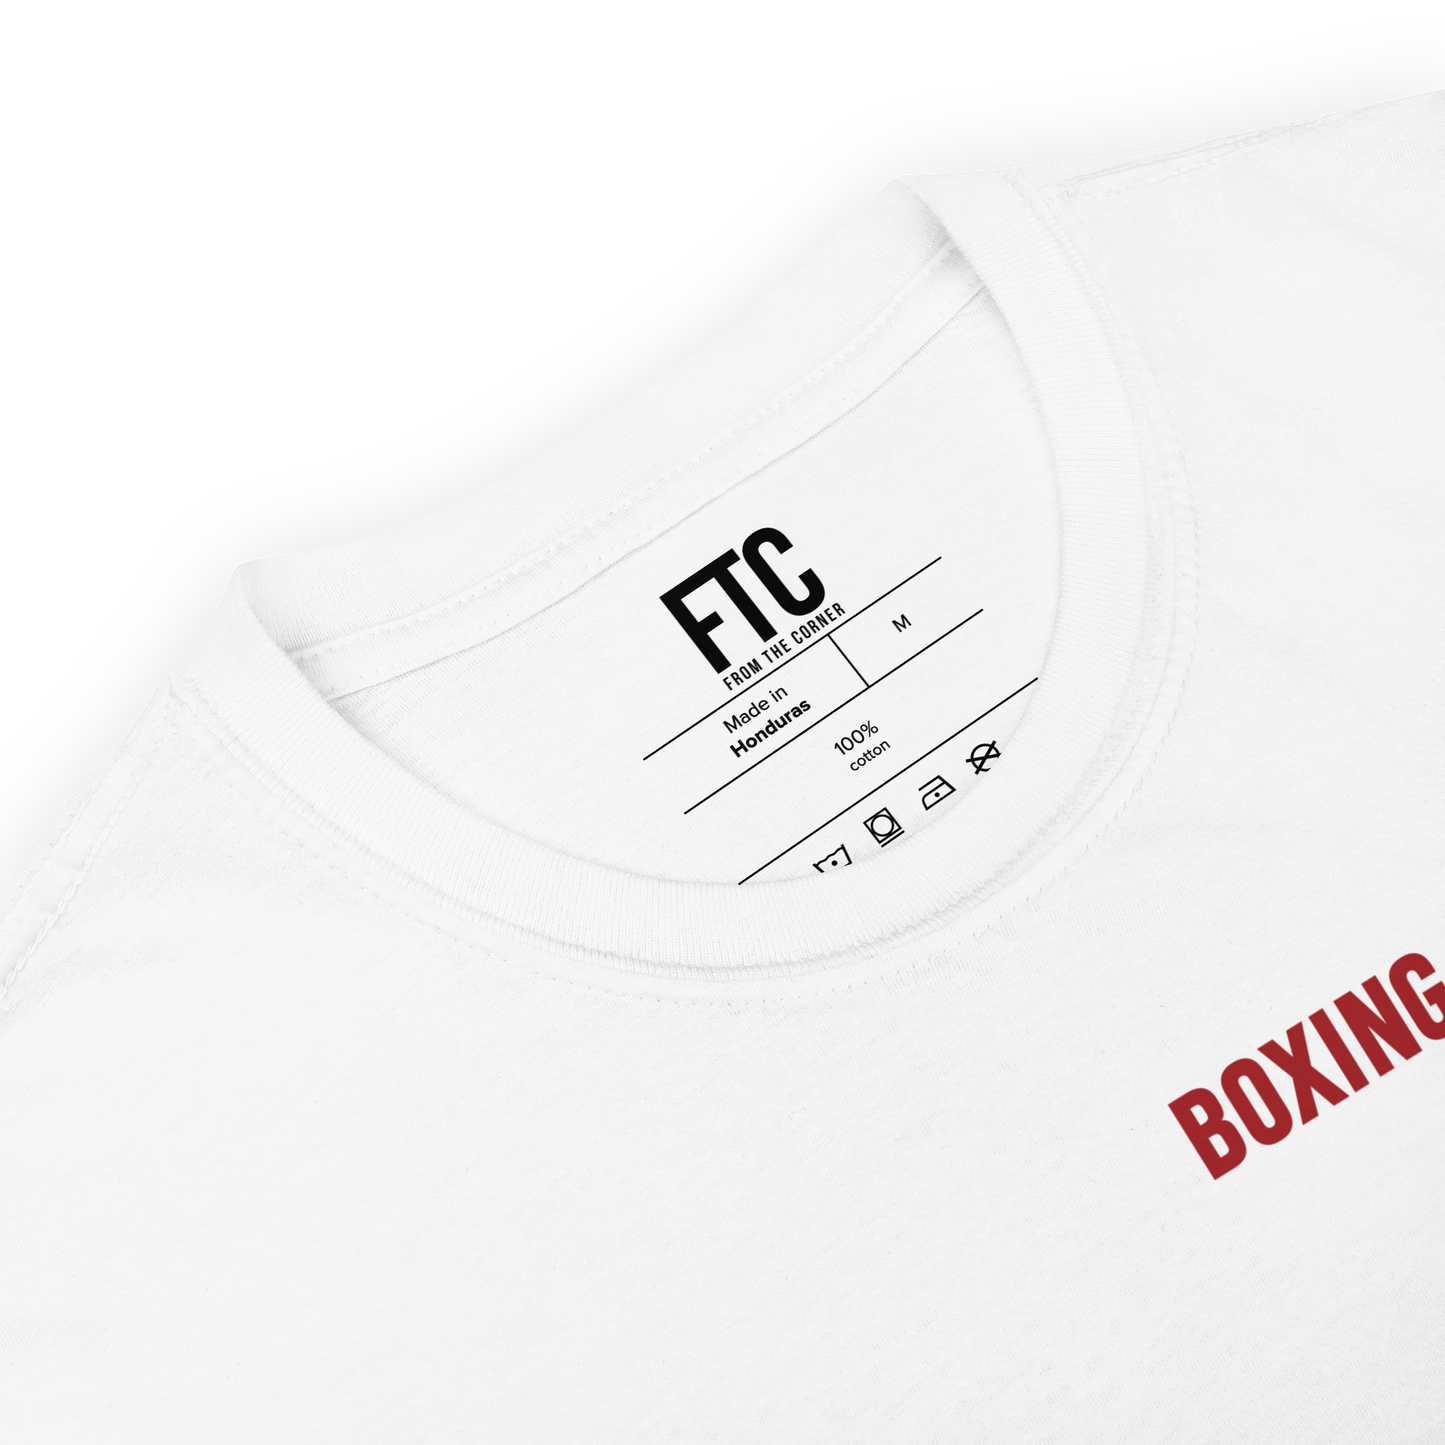 Boxing Alley Tee